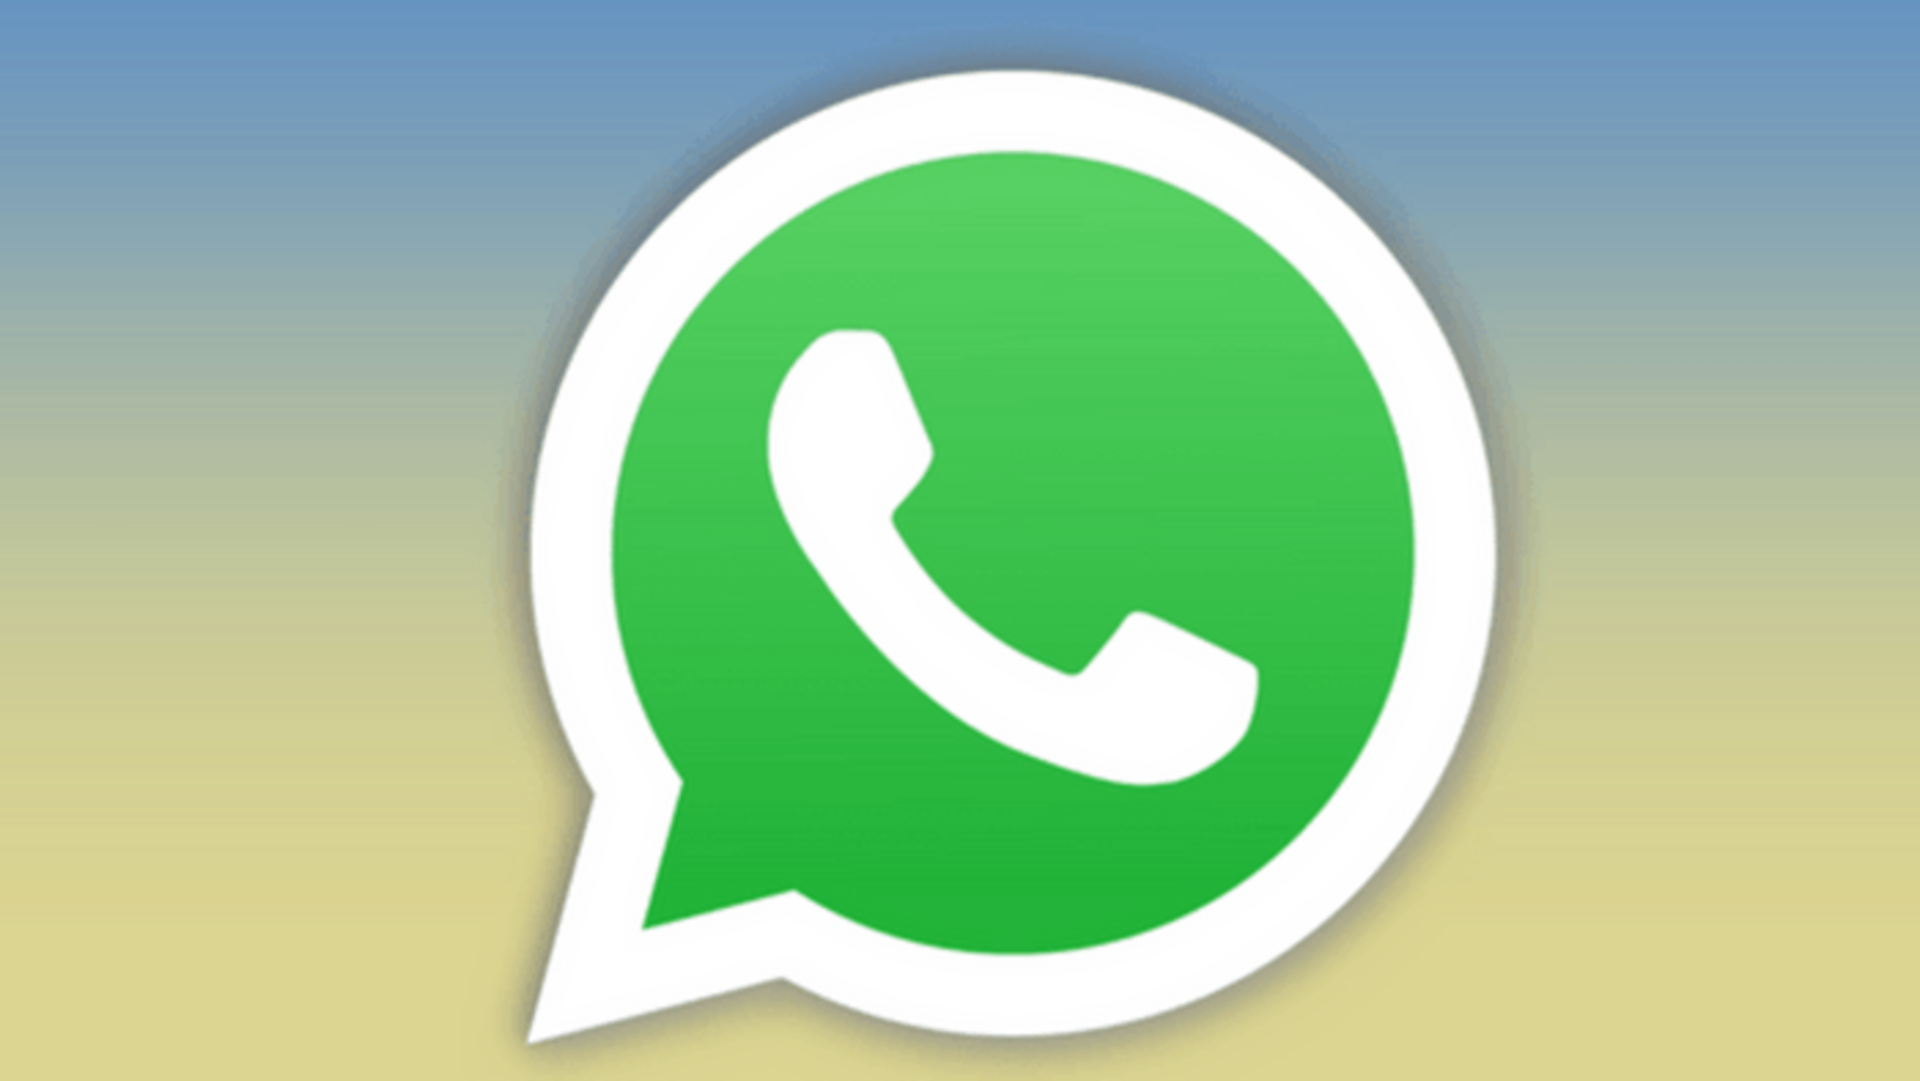 New WhatsApp features: App language change, status archive, and more